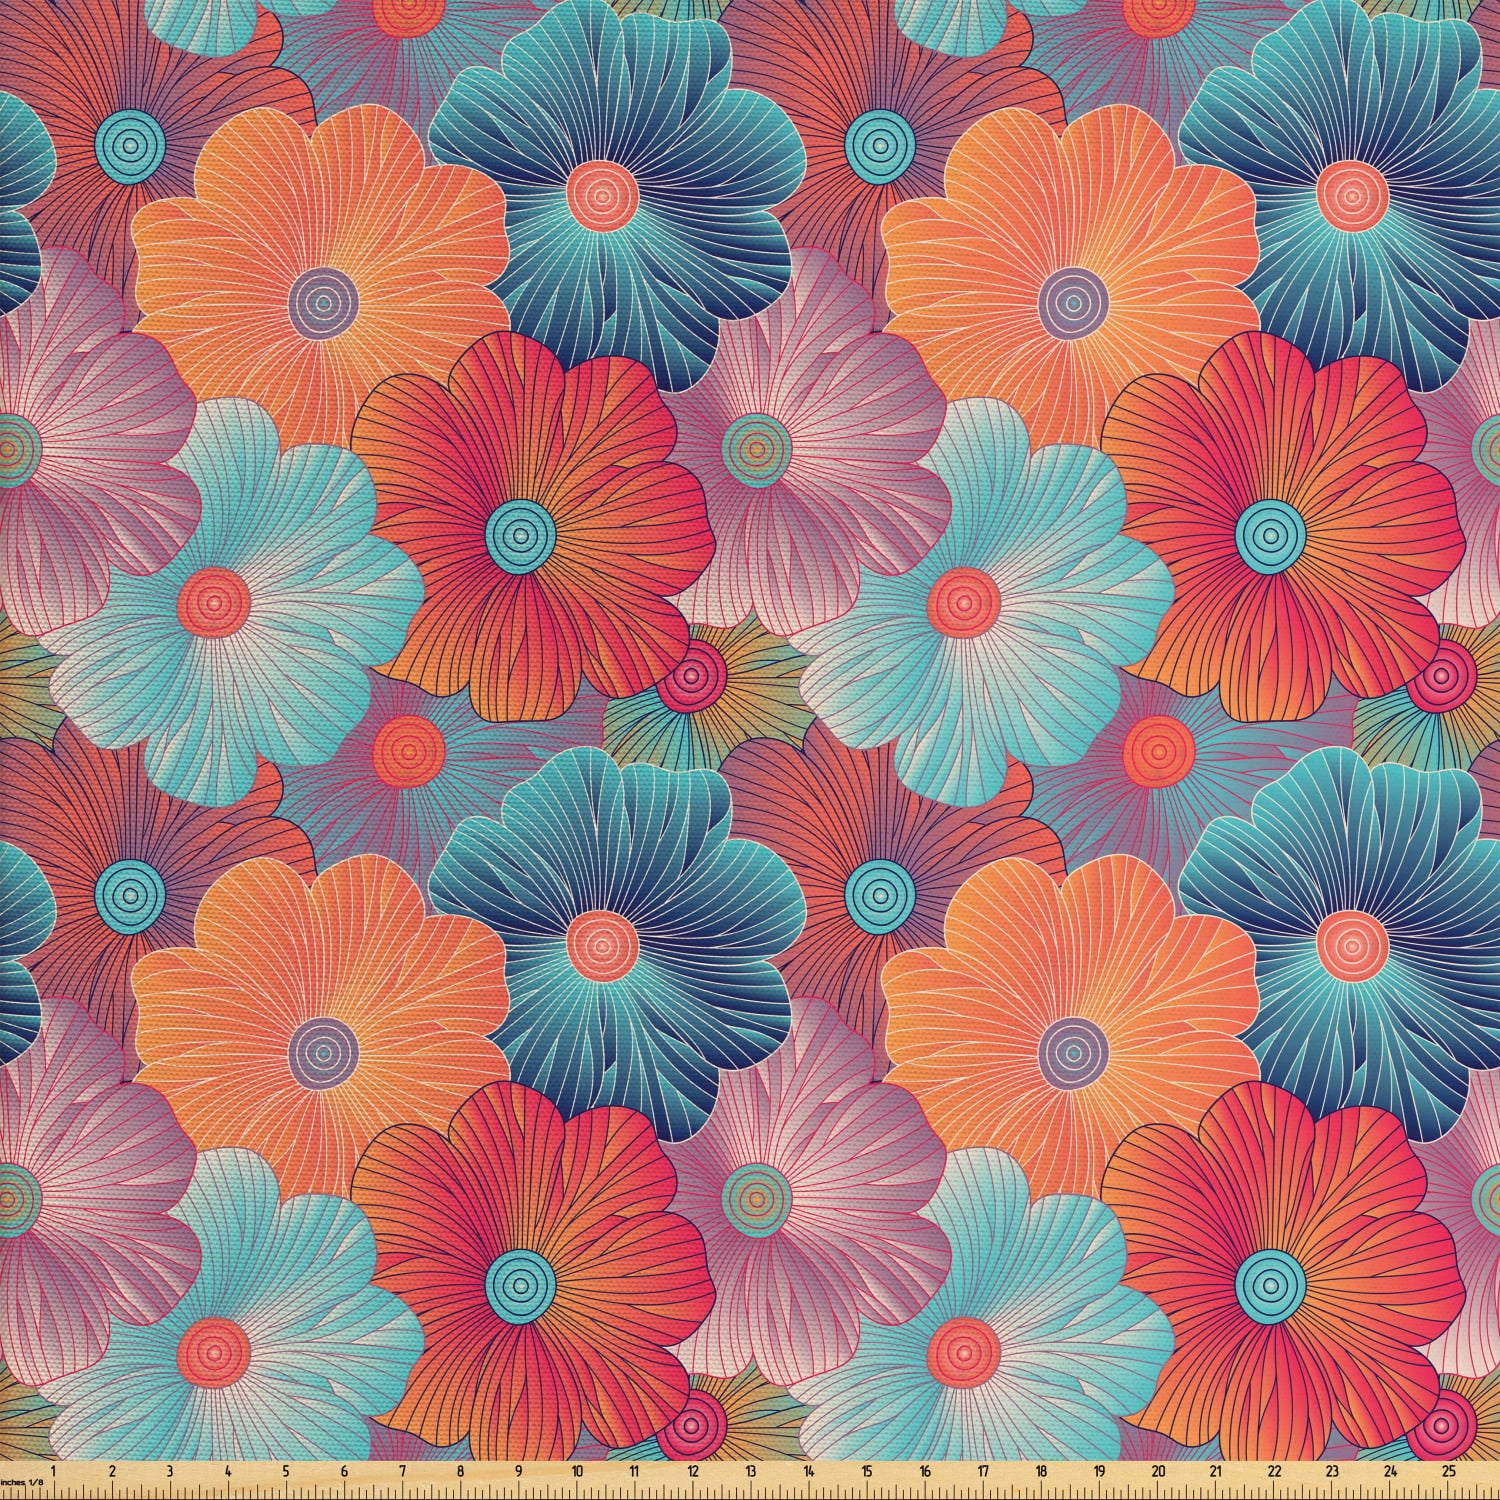 Floral Fabric by The Yard, Repeating Pattern Overlapped Flower Petals ...